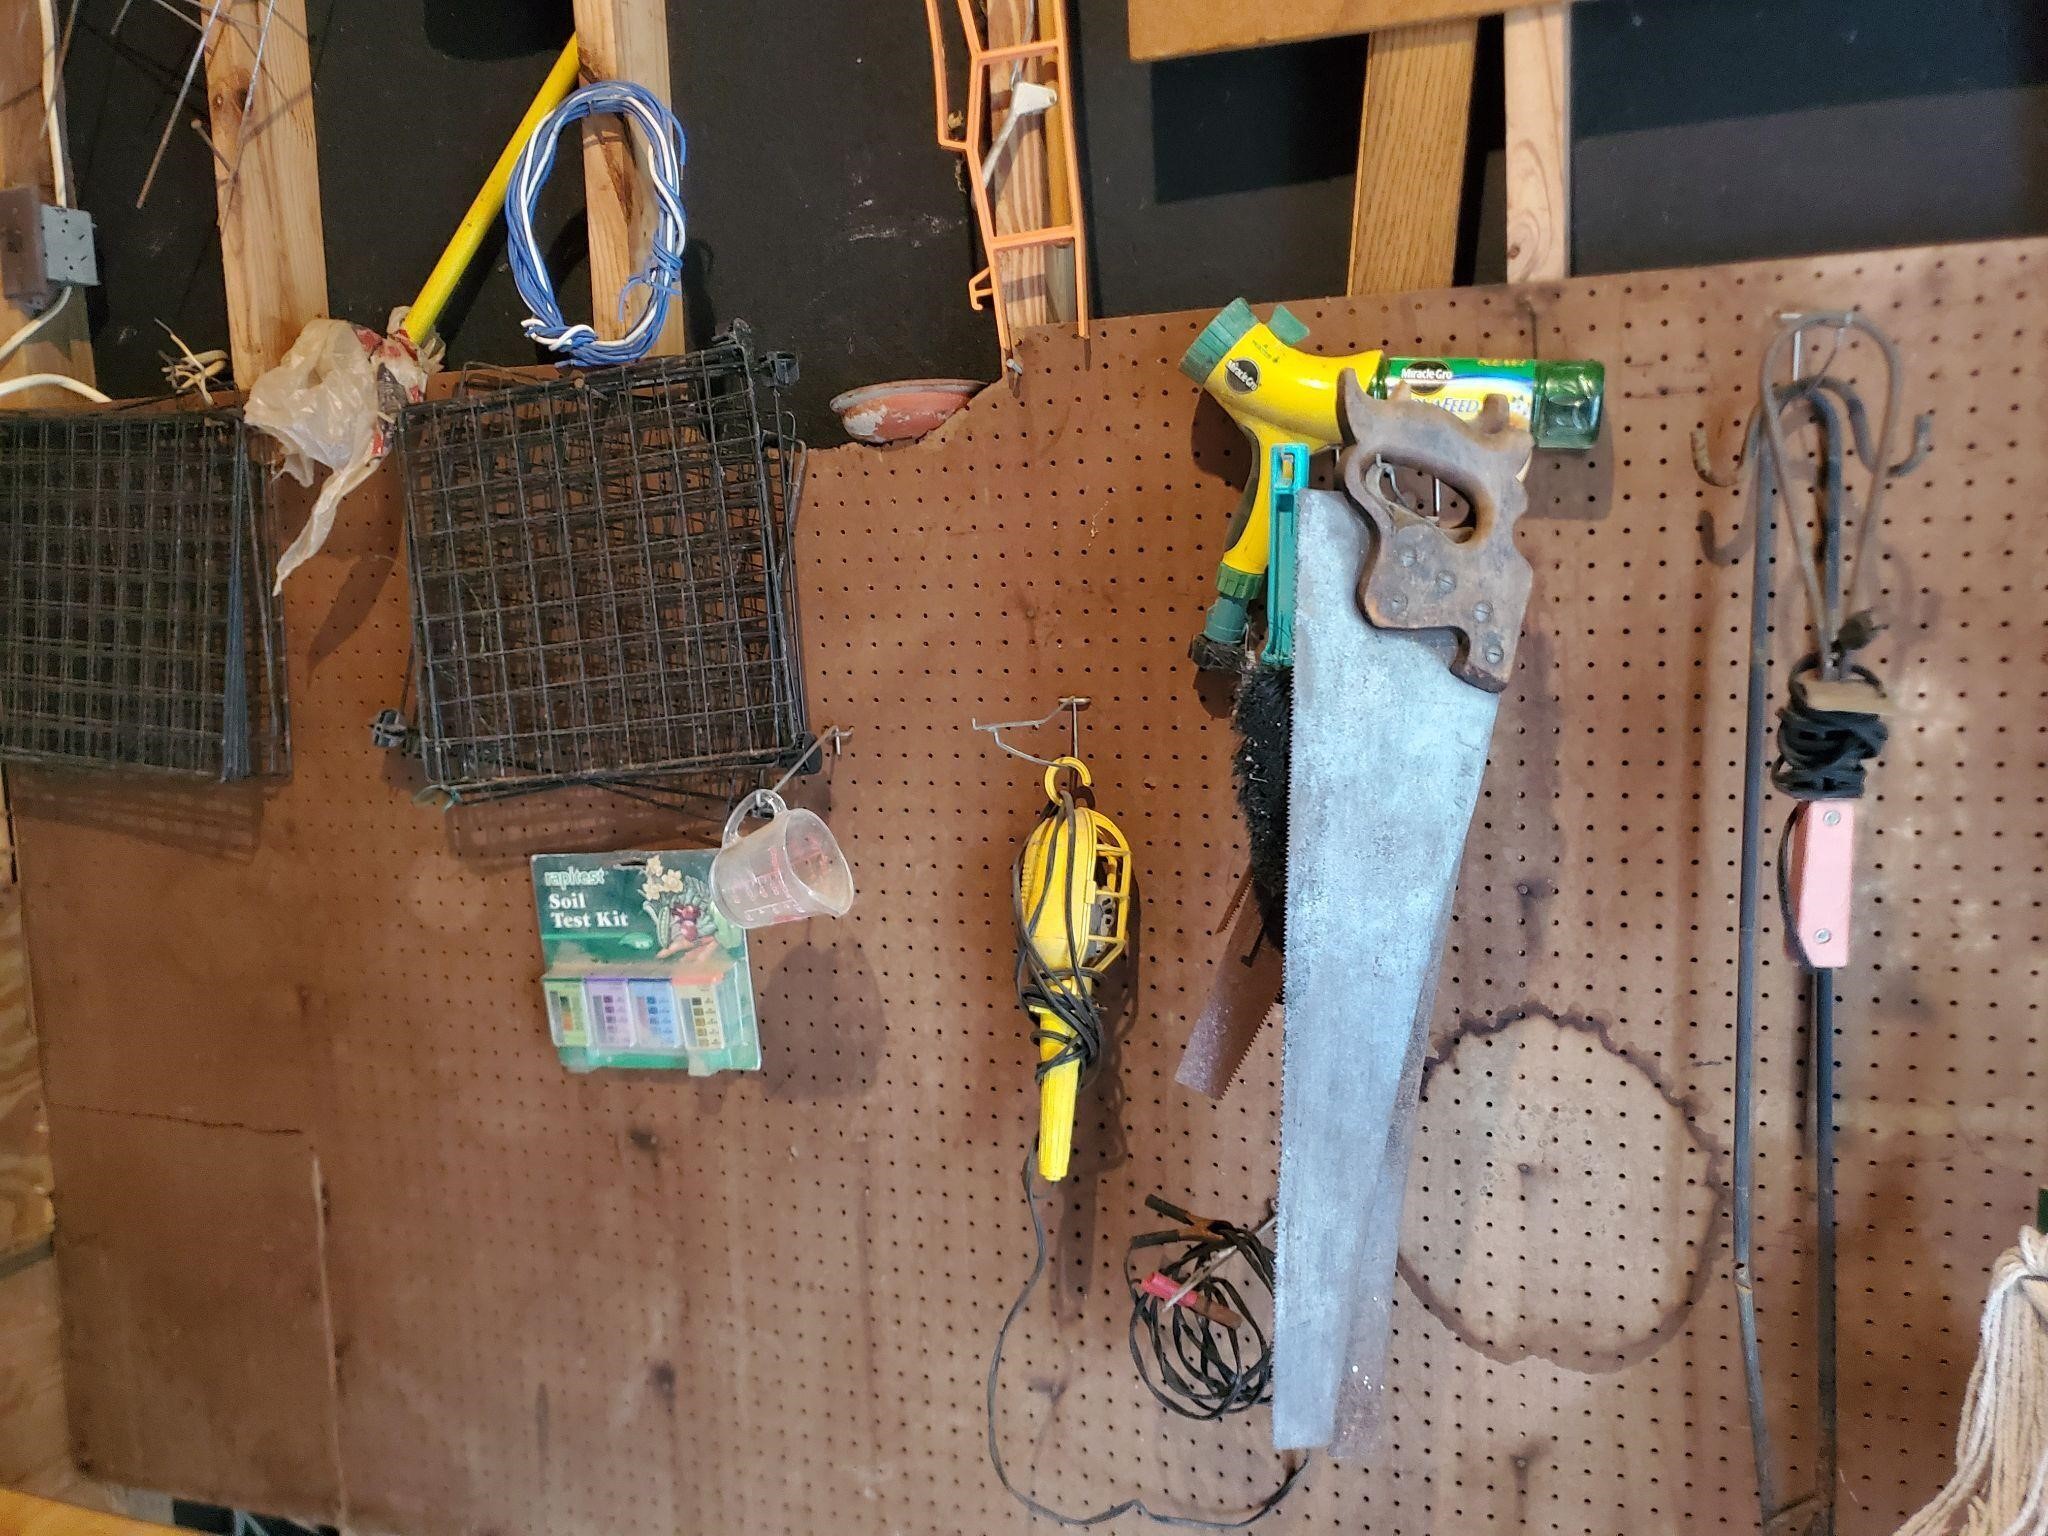 Contents hanging on wall saws and more